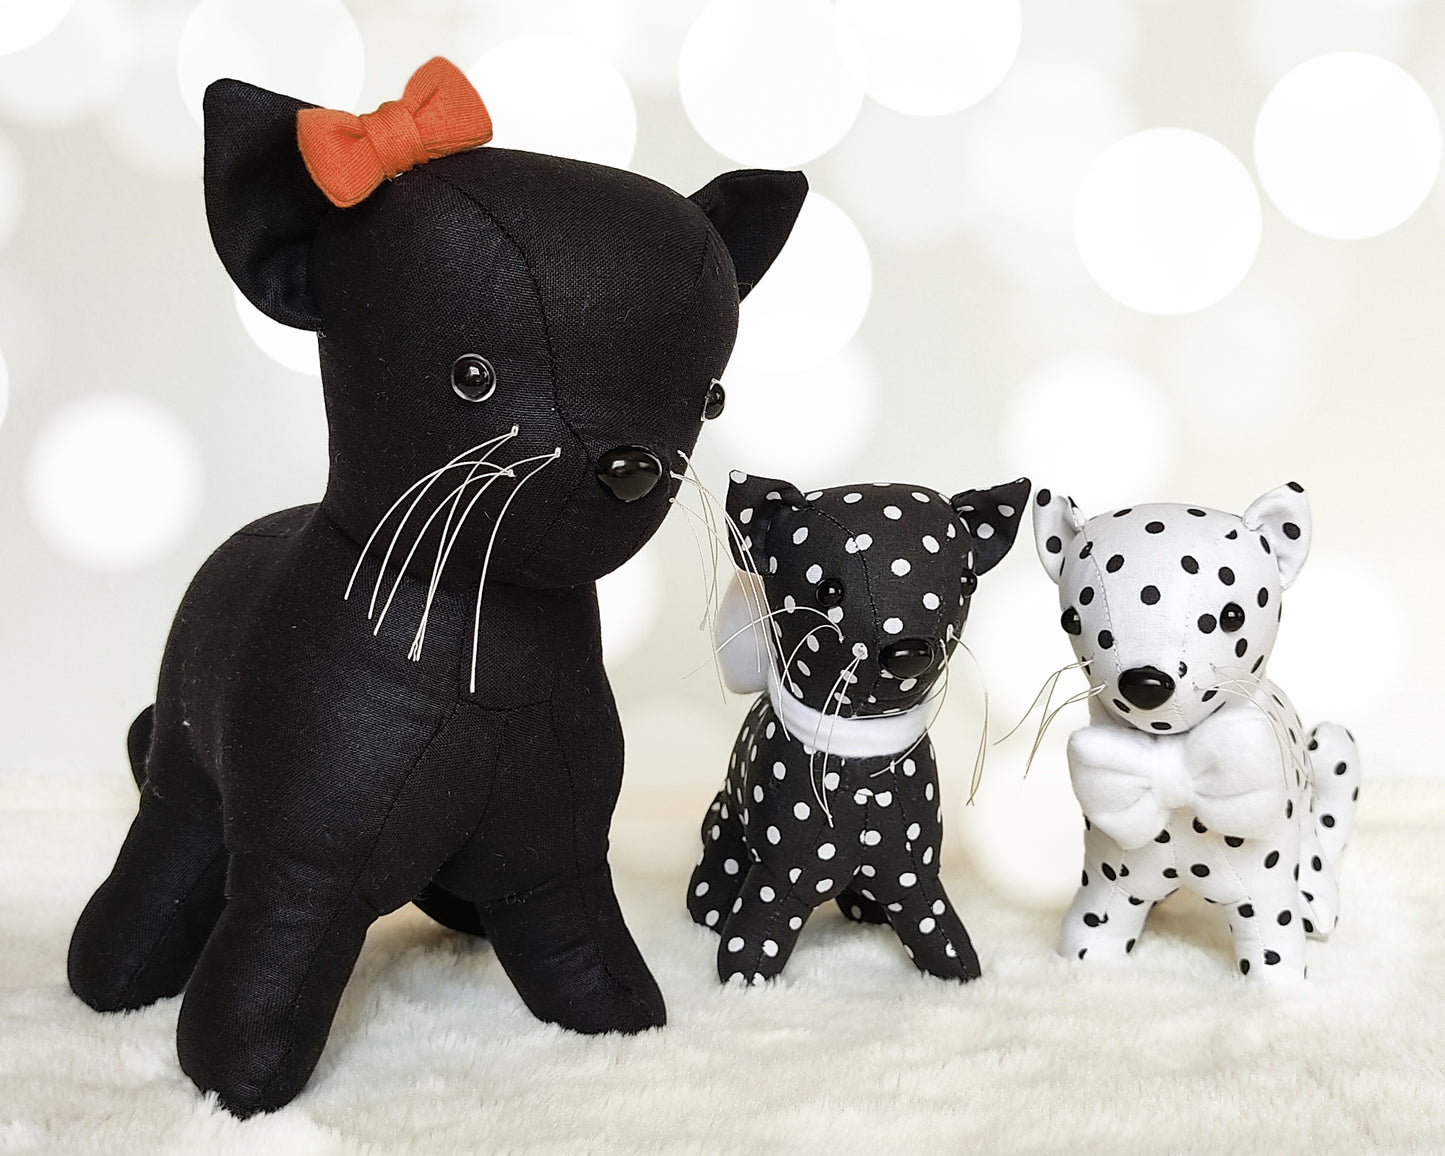 Black Cat and Kittens - PDF sewing pattern and tutorial